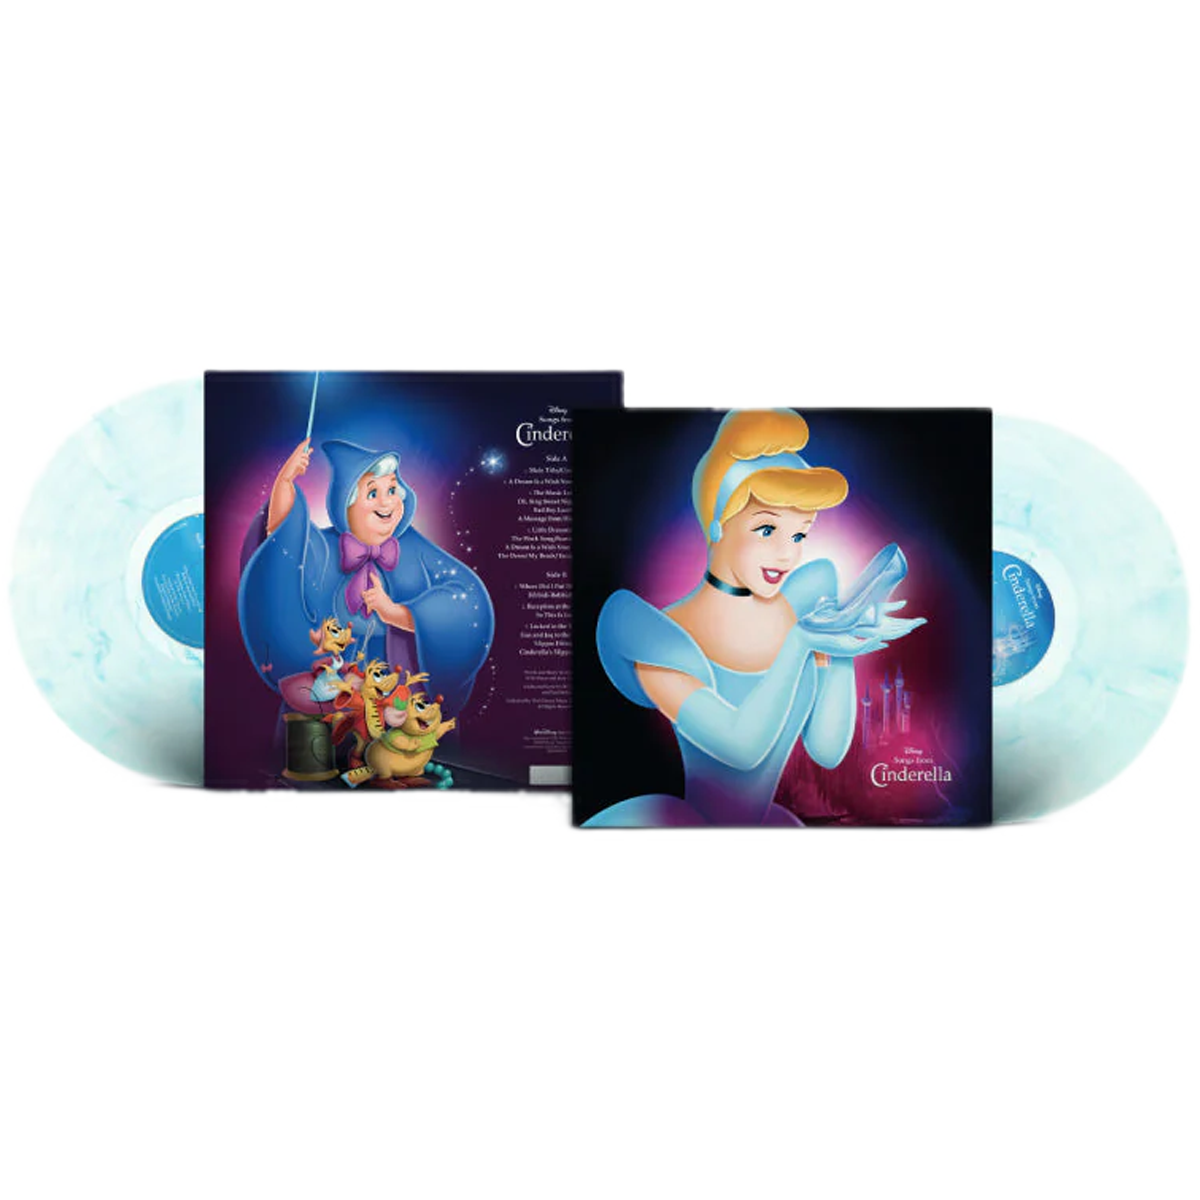 Various Artists - Songs From Cinderella: Limited Polished Marble Colour Vinyl LP